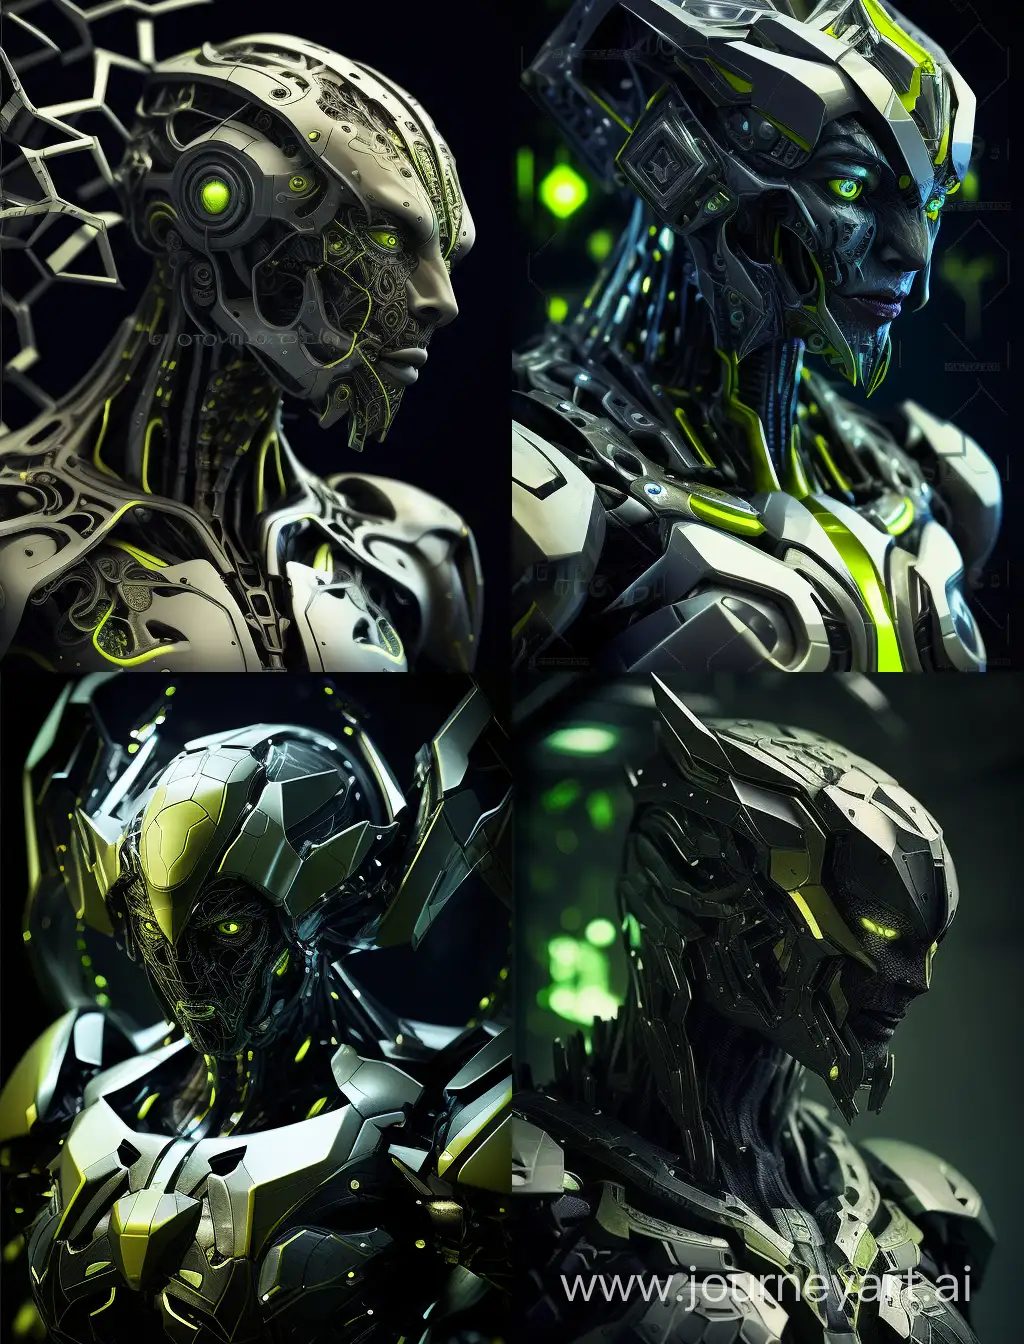 a low angle Cinematic high quality and  high resolution dynamic low angle shot of a human cybnetic black and lime hexagonal patterned bioroid super advanced mutant with a triangular like helmet and facial interface of artificial components with alien cybernetic enhancements, such as neural interfaces, robotic limbs and ocular implants  using a lap top with vibrant contemporary background or other bioroids  , mid journey volumetric lighting, hyper-realistic,  photorealistic, cinematography,ultra realism,Volumetric lighting casts dramatic shadows, enhancing the ultra-realistic cinematography